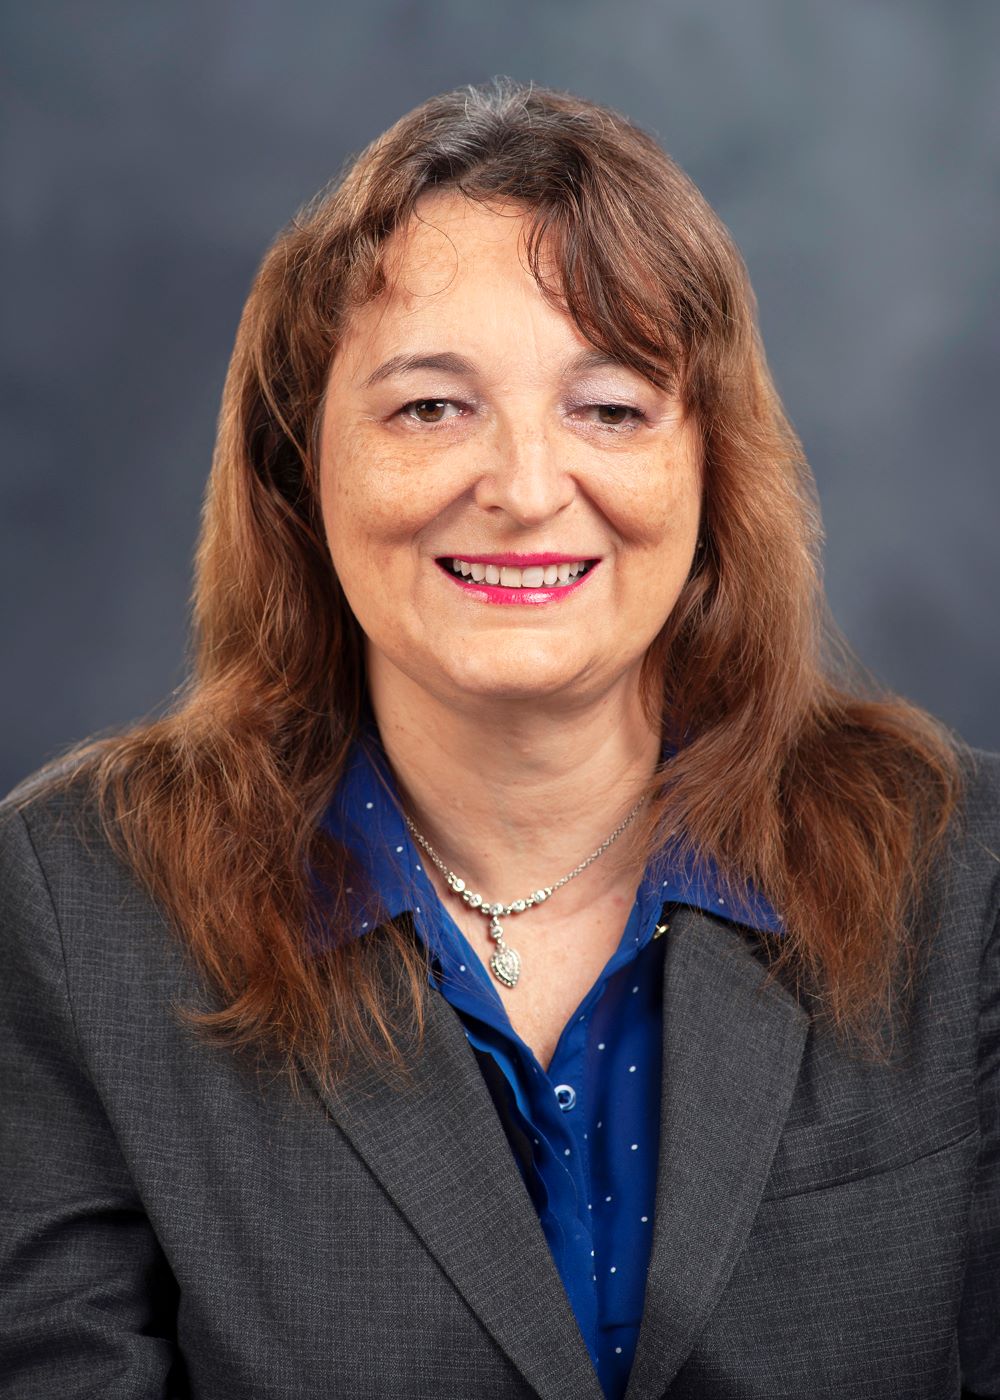 Headshot of Sylvia. Long brown hair, wearing a gray suit with blue blouse.